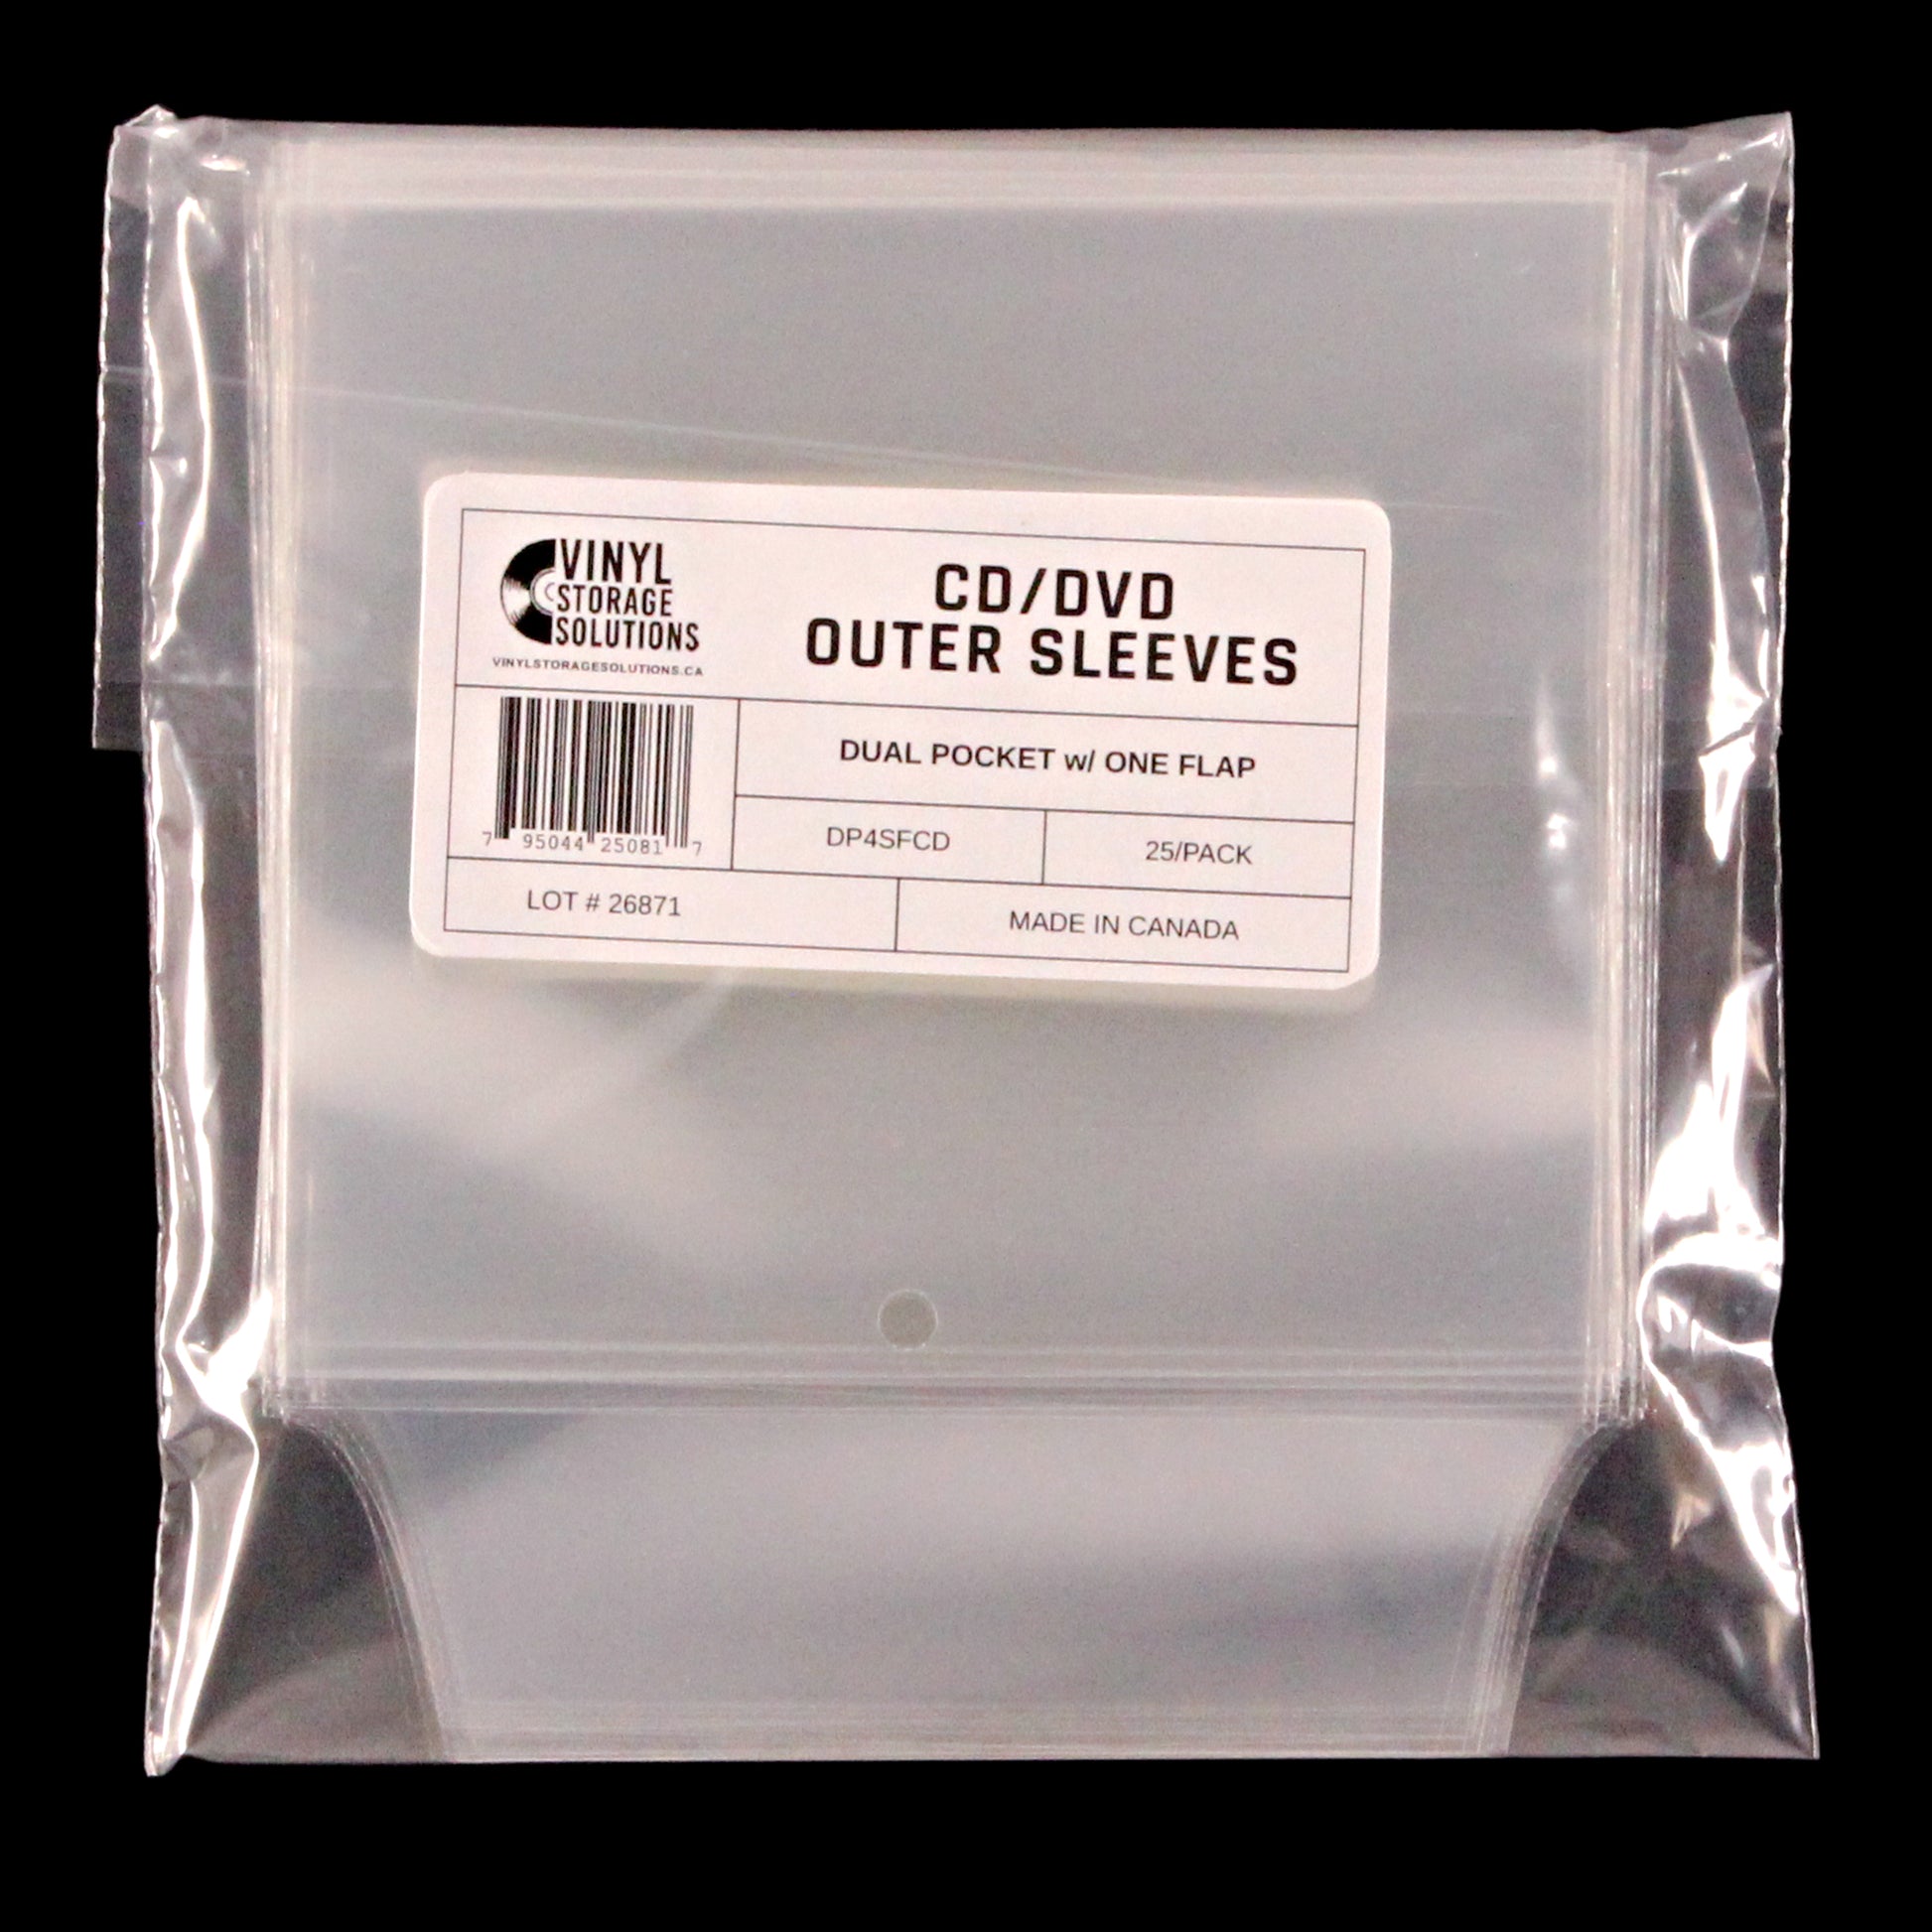 CD/DVD Dual Pocket Outer Sleeves w/ One Flap - 4mil (25 pack) - Vinyl Storage Solutions